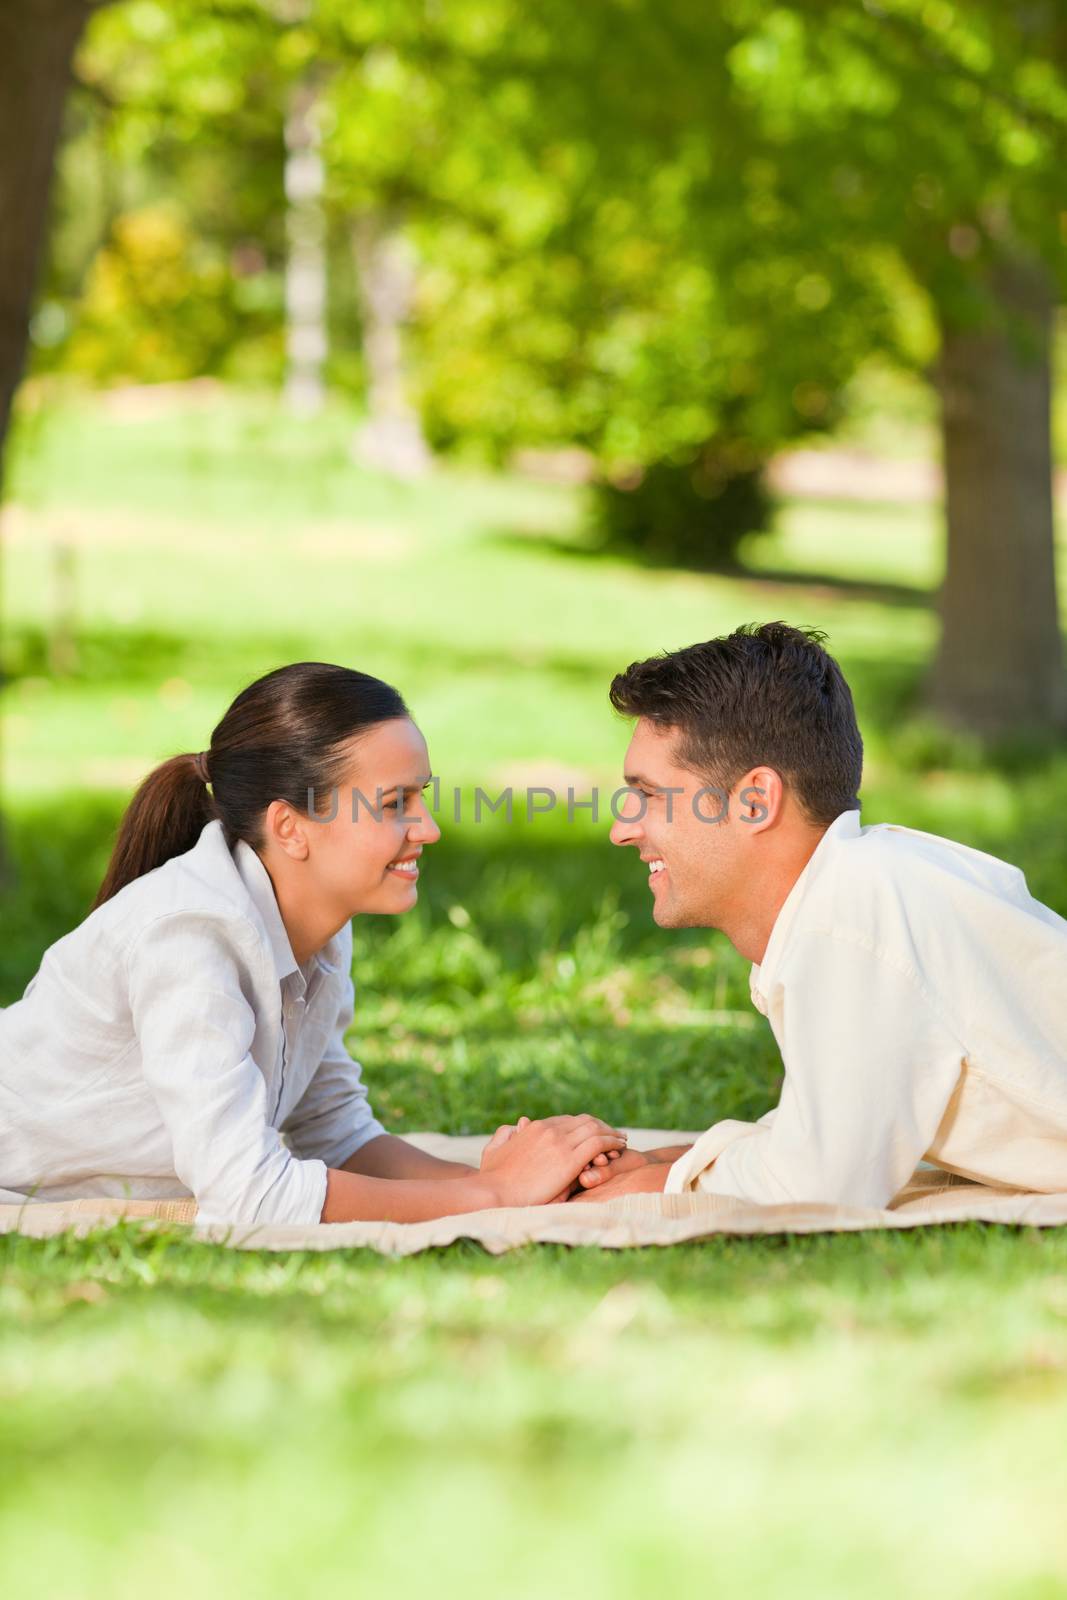 Lovely couple in the park during the summer